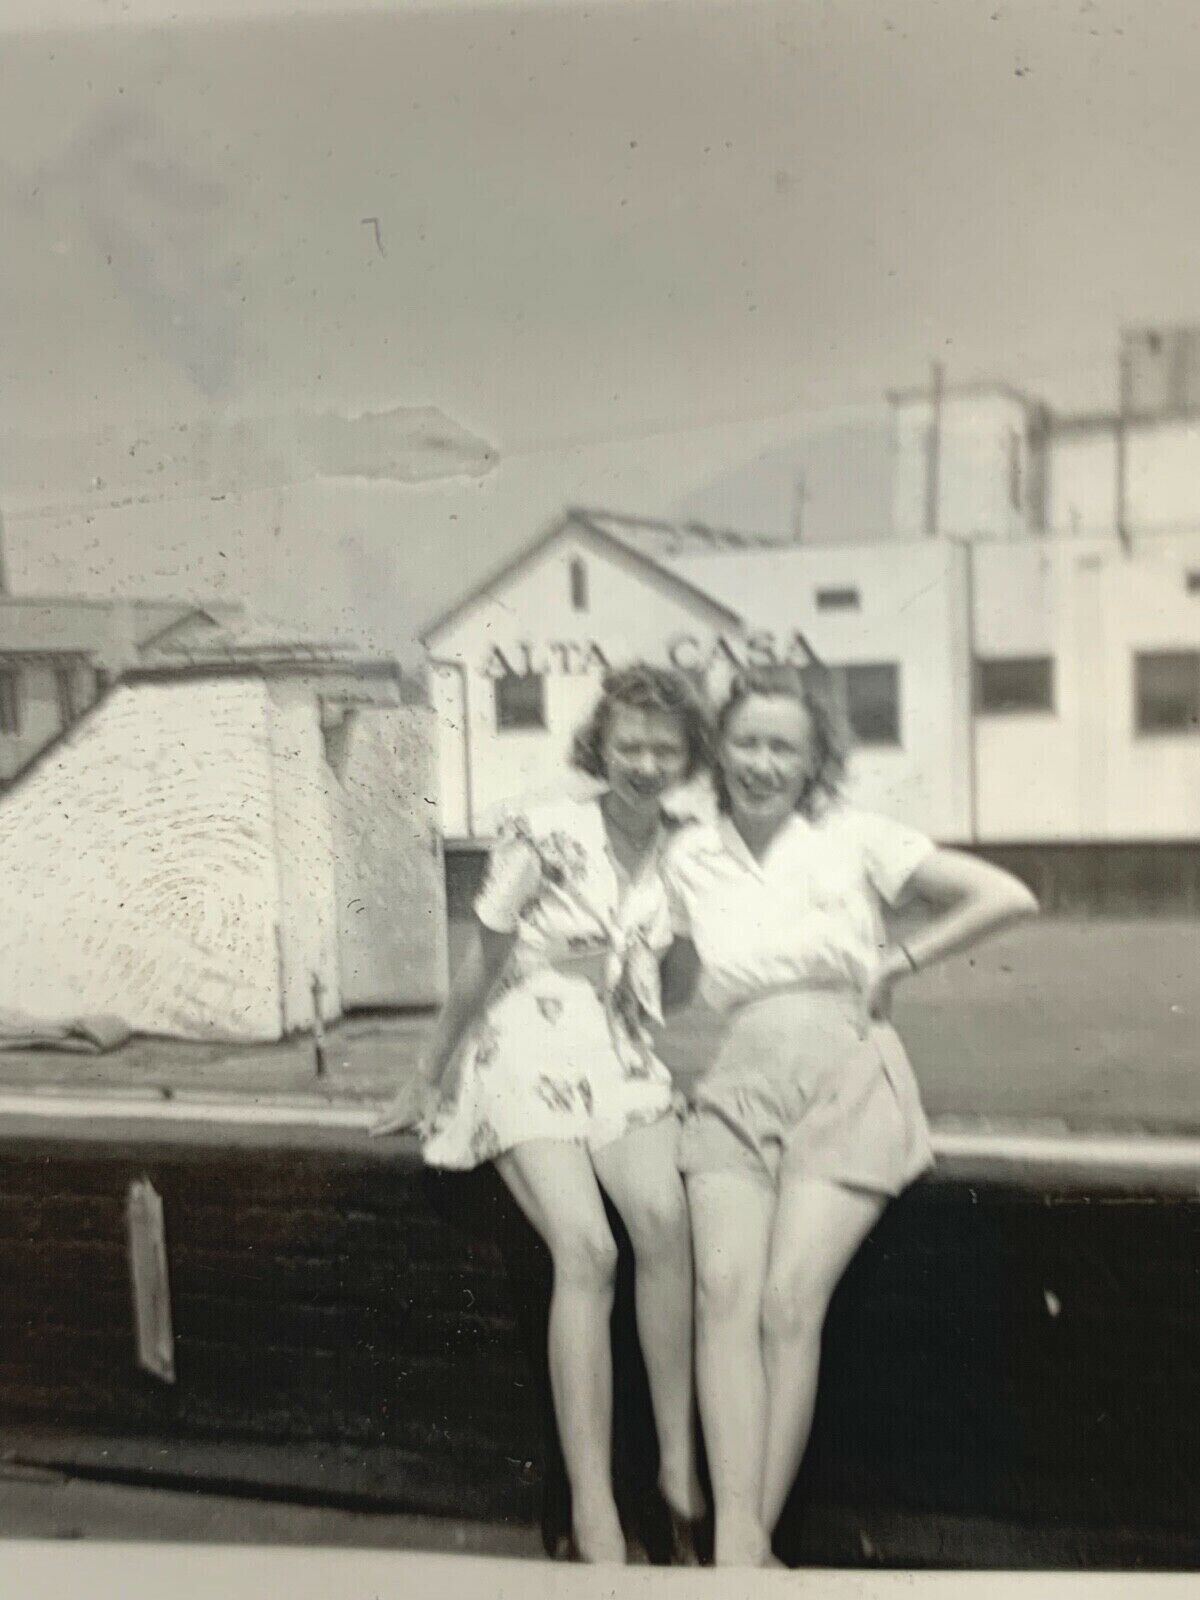 (AnH) Vintage FOUND Photo Photograph Pretty Women Rooftop Casa Alta Sign Legs